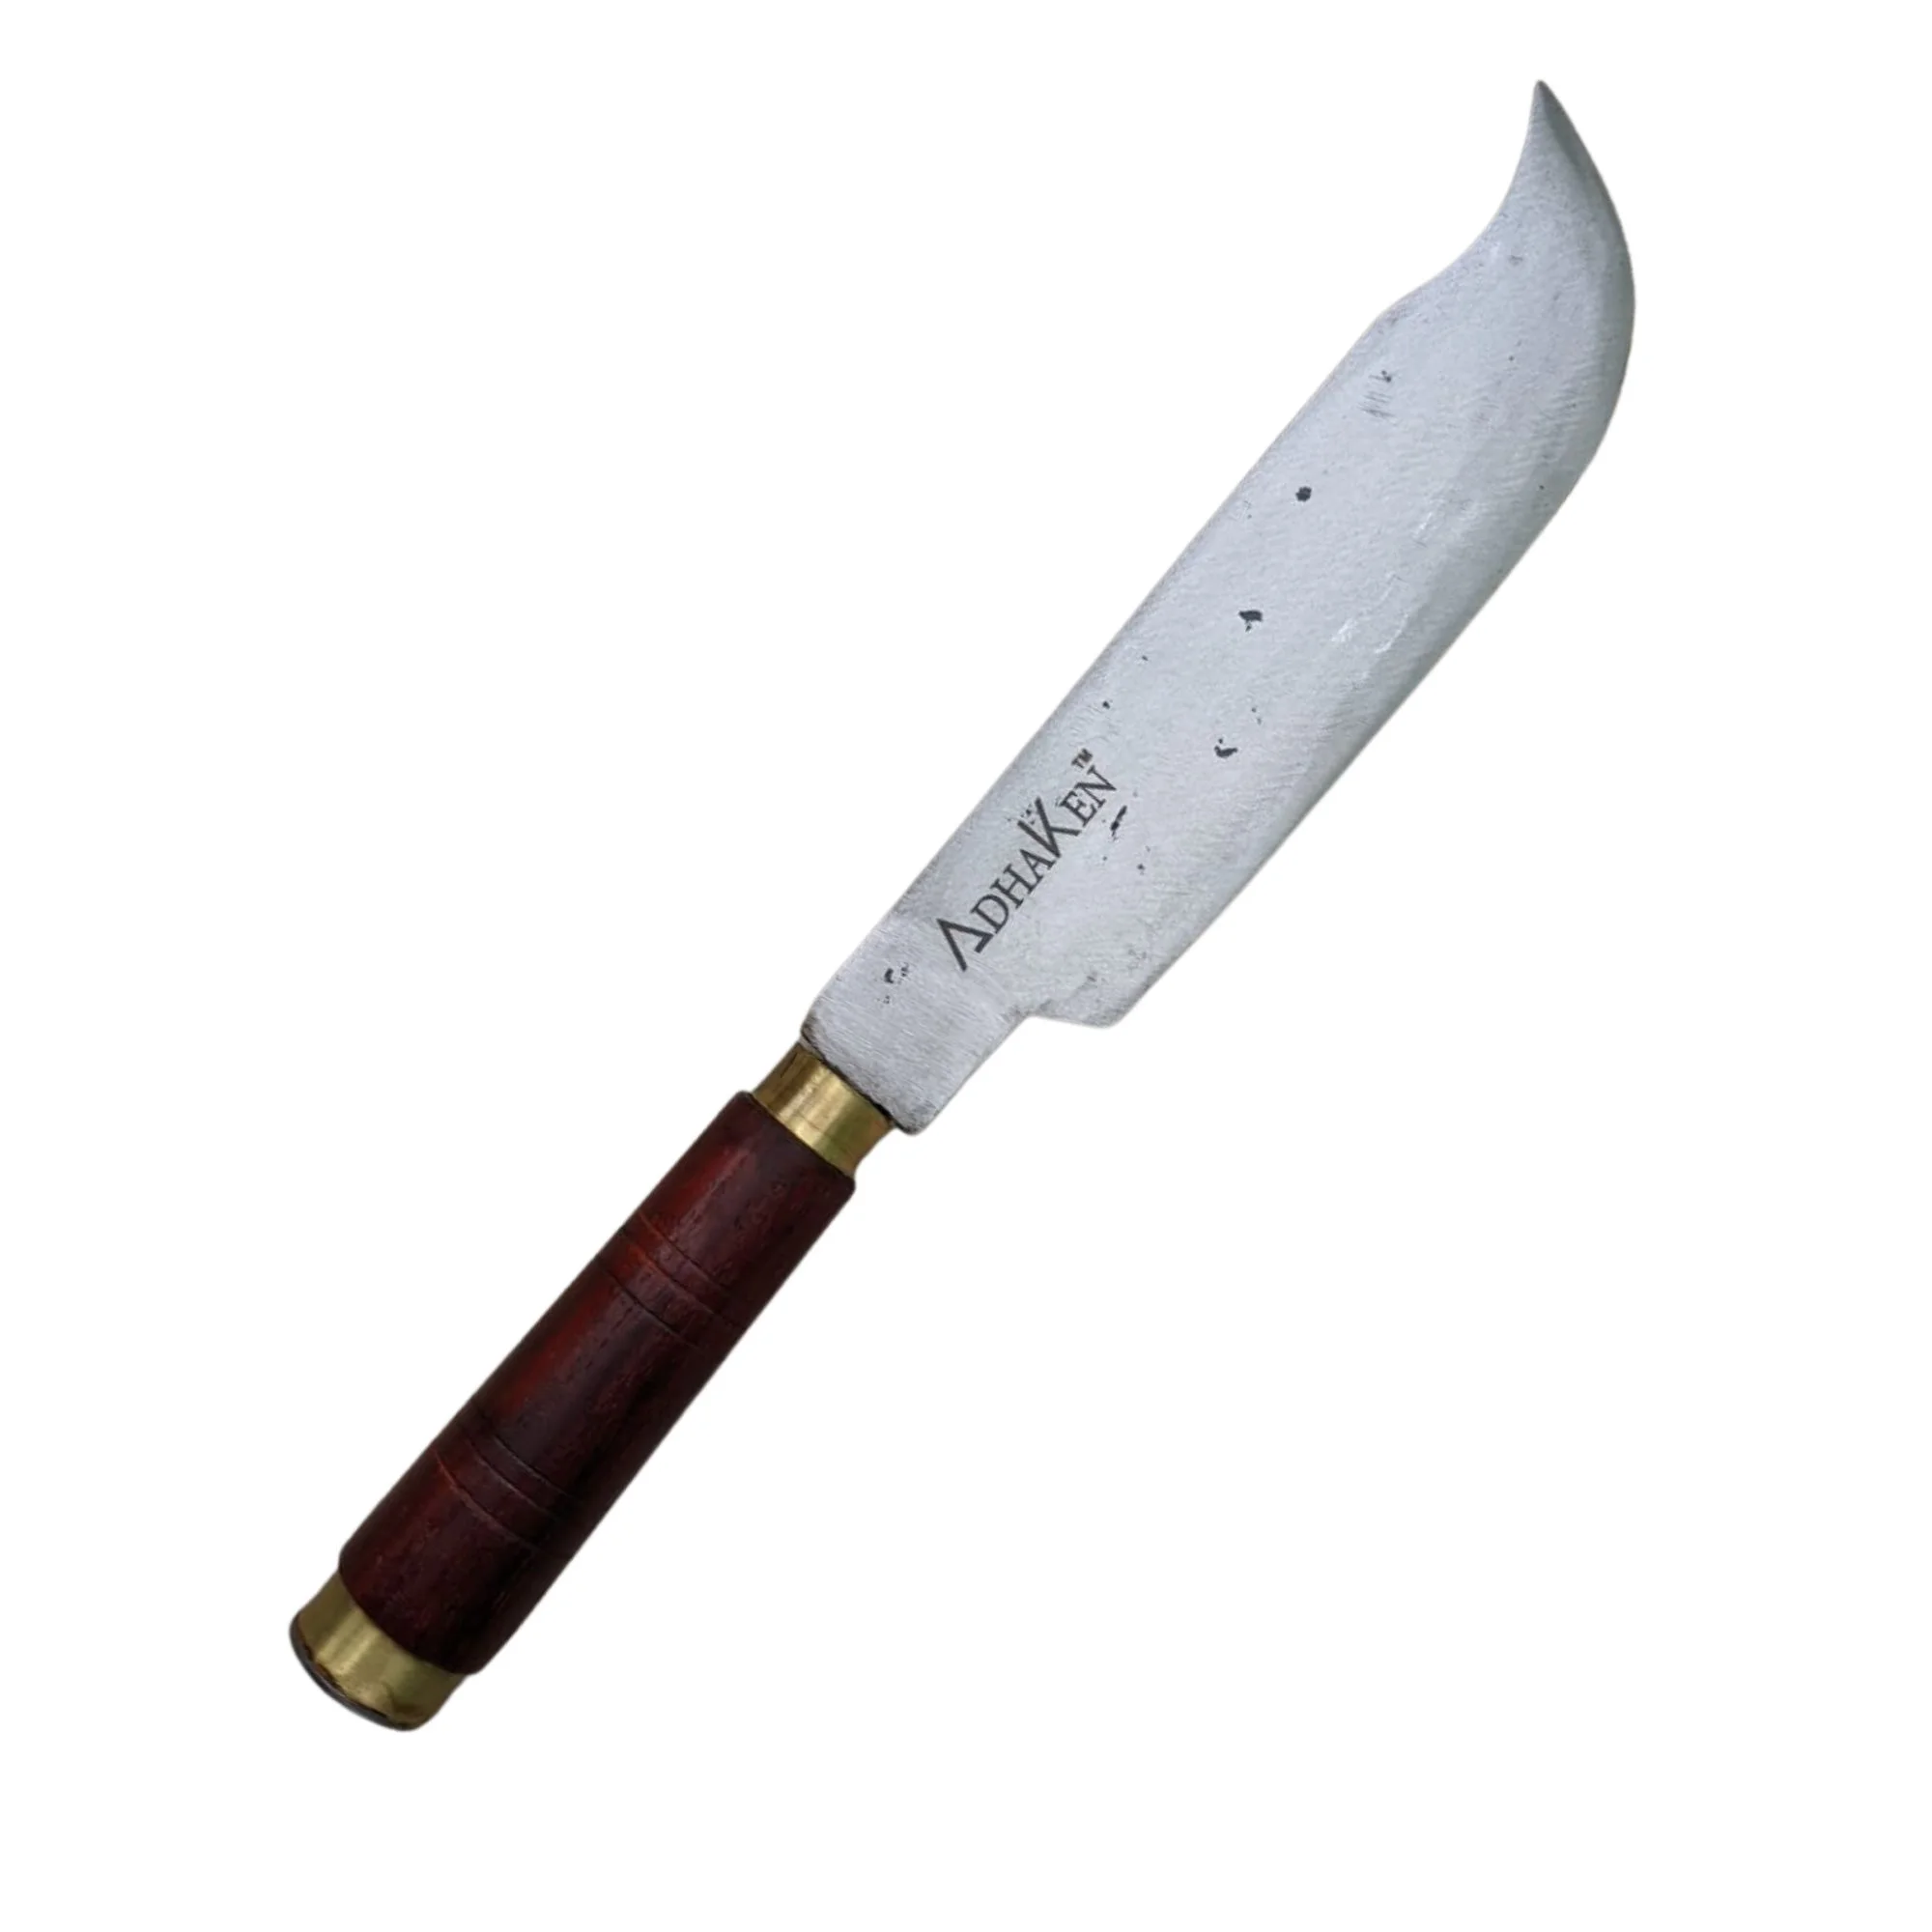 Buy Now Fish cutting Knife online 500g - Handmade Knives in India